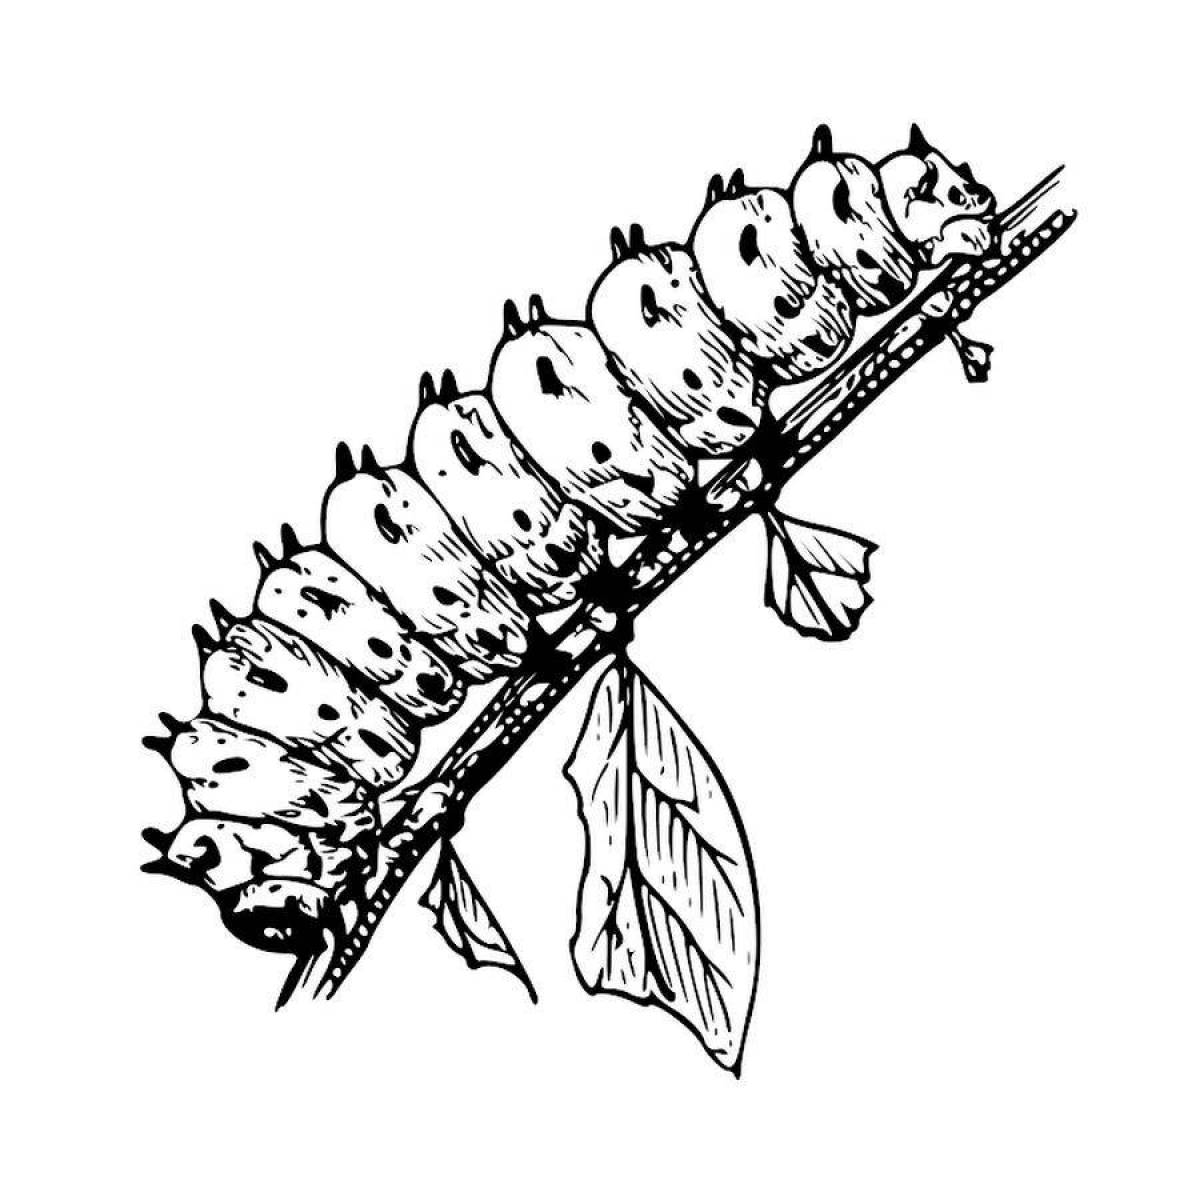 Caterpillar dog coloring page